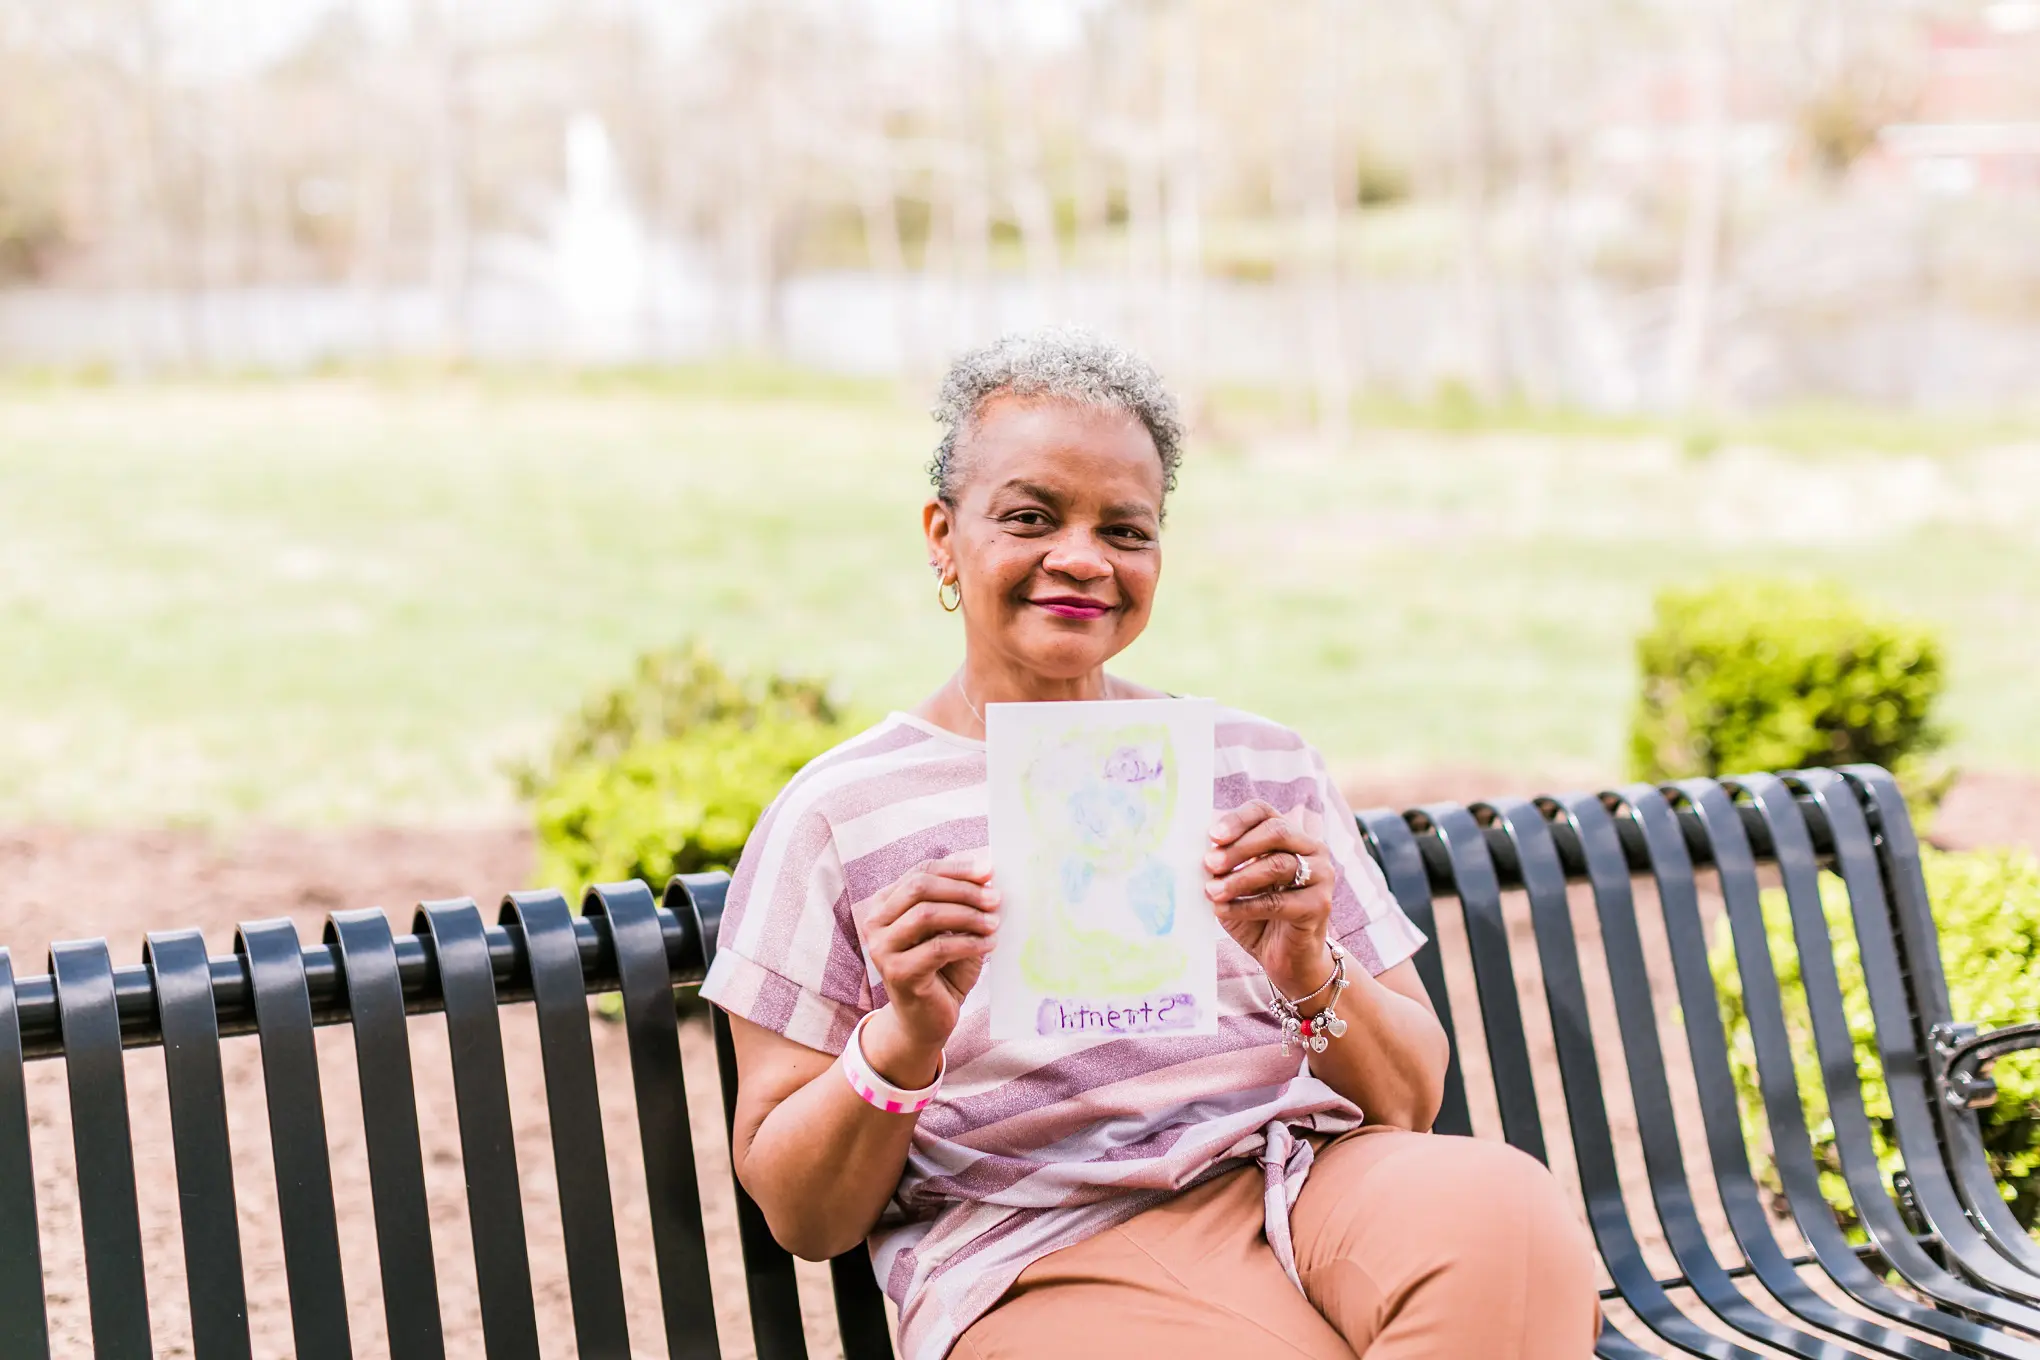 An elderly Black woman is sitting on a bench outside and holding up a self-made painting.